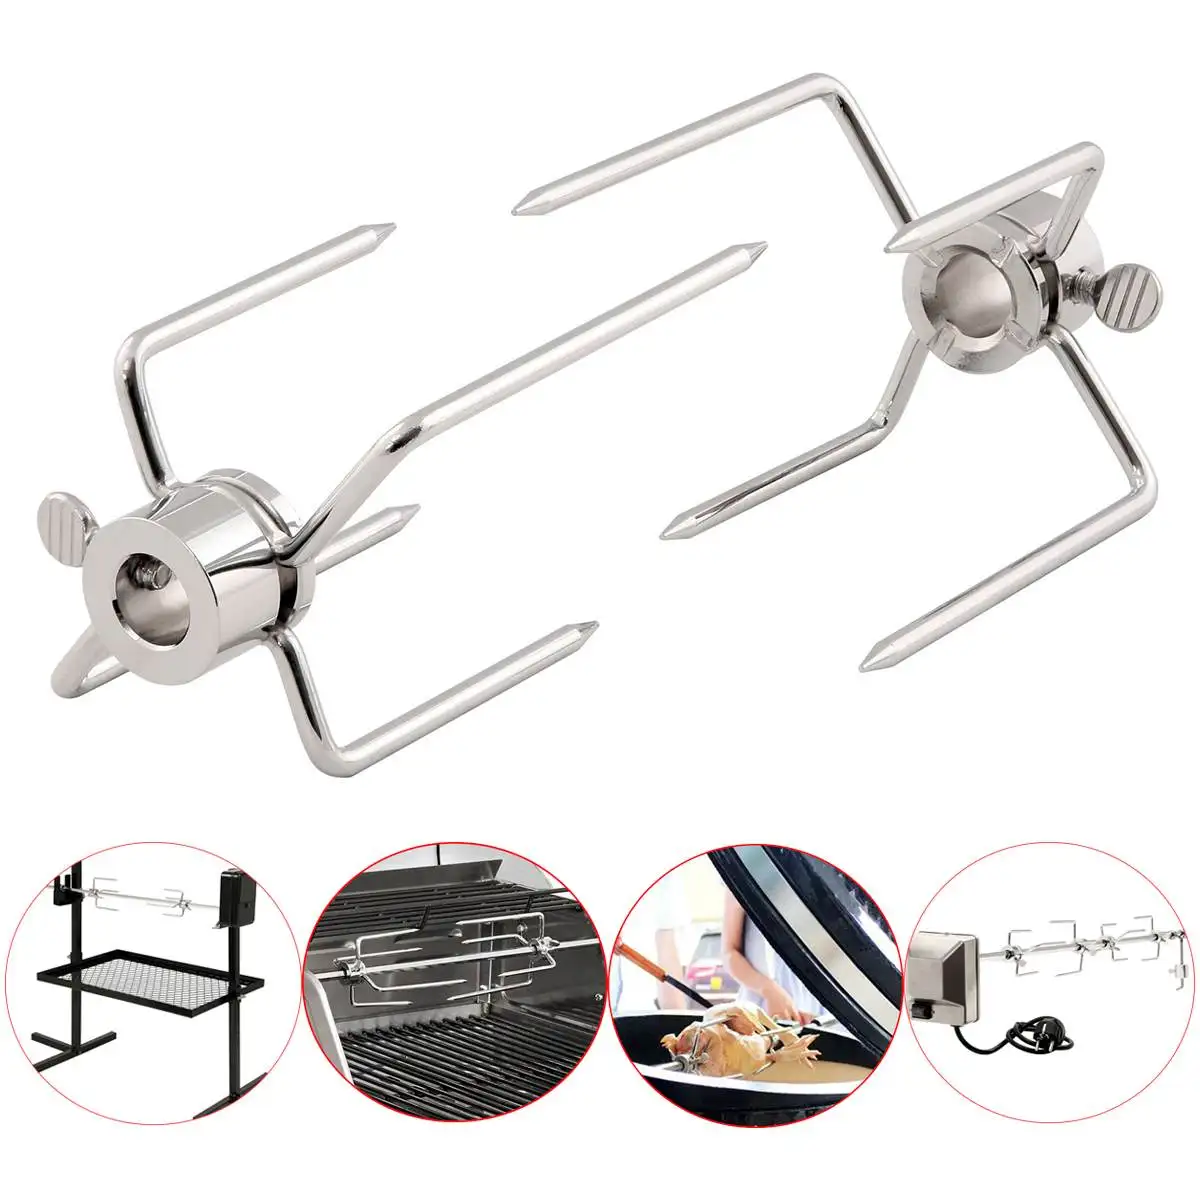 Rotisserie Barbecue Chicken Meat Forks Stainless Steel Spit Charcoal Kitchen 